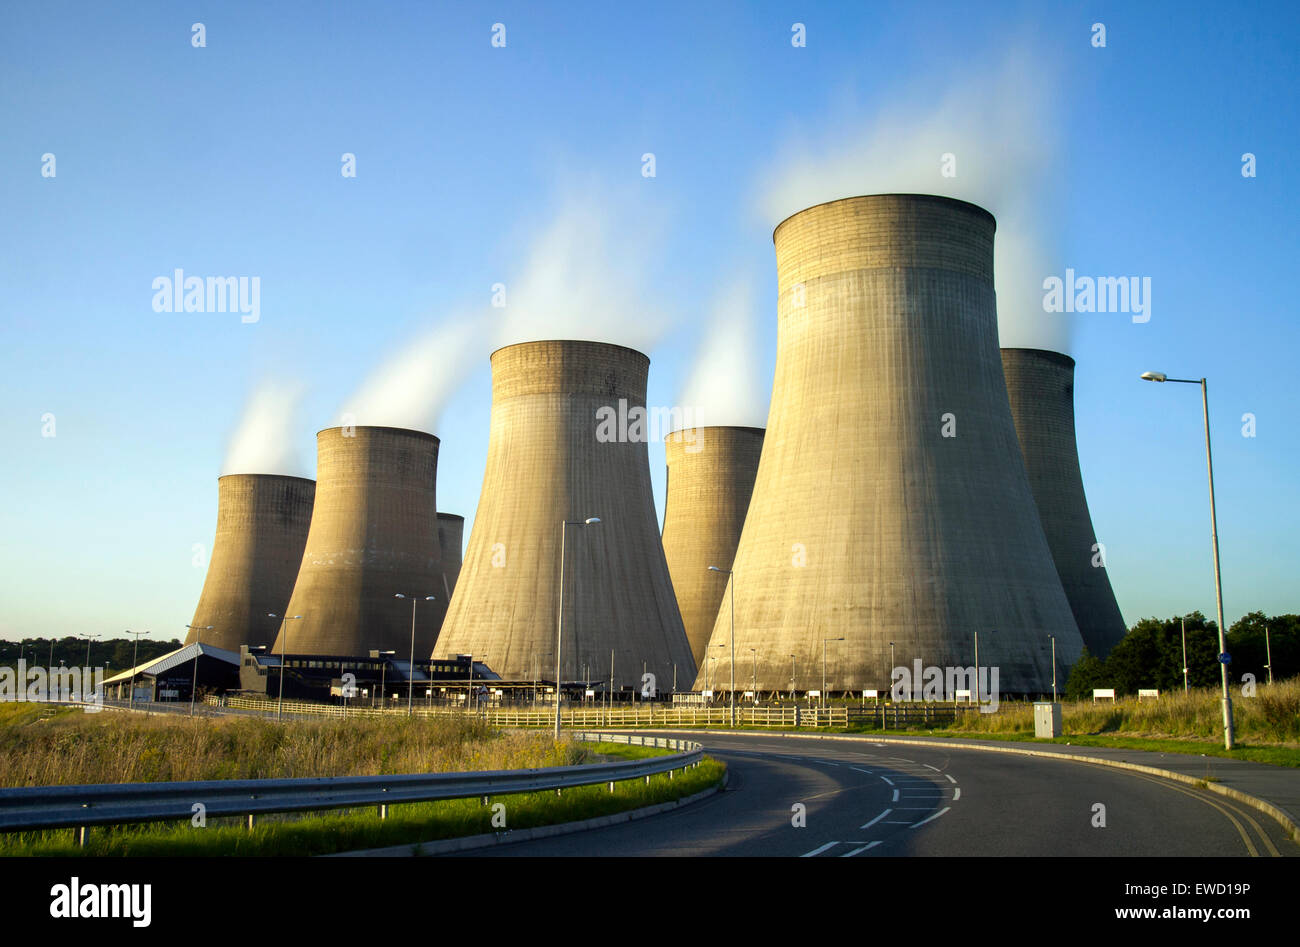 Long exposure of steam coming out of the cooling towers at Ratcliffe on Soar Power Station, Nottinghamshire England UK Stock Photo